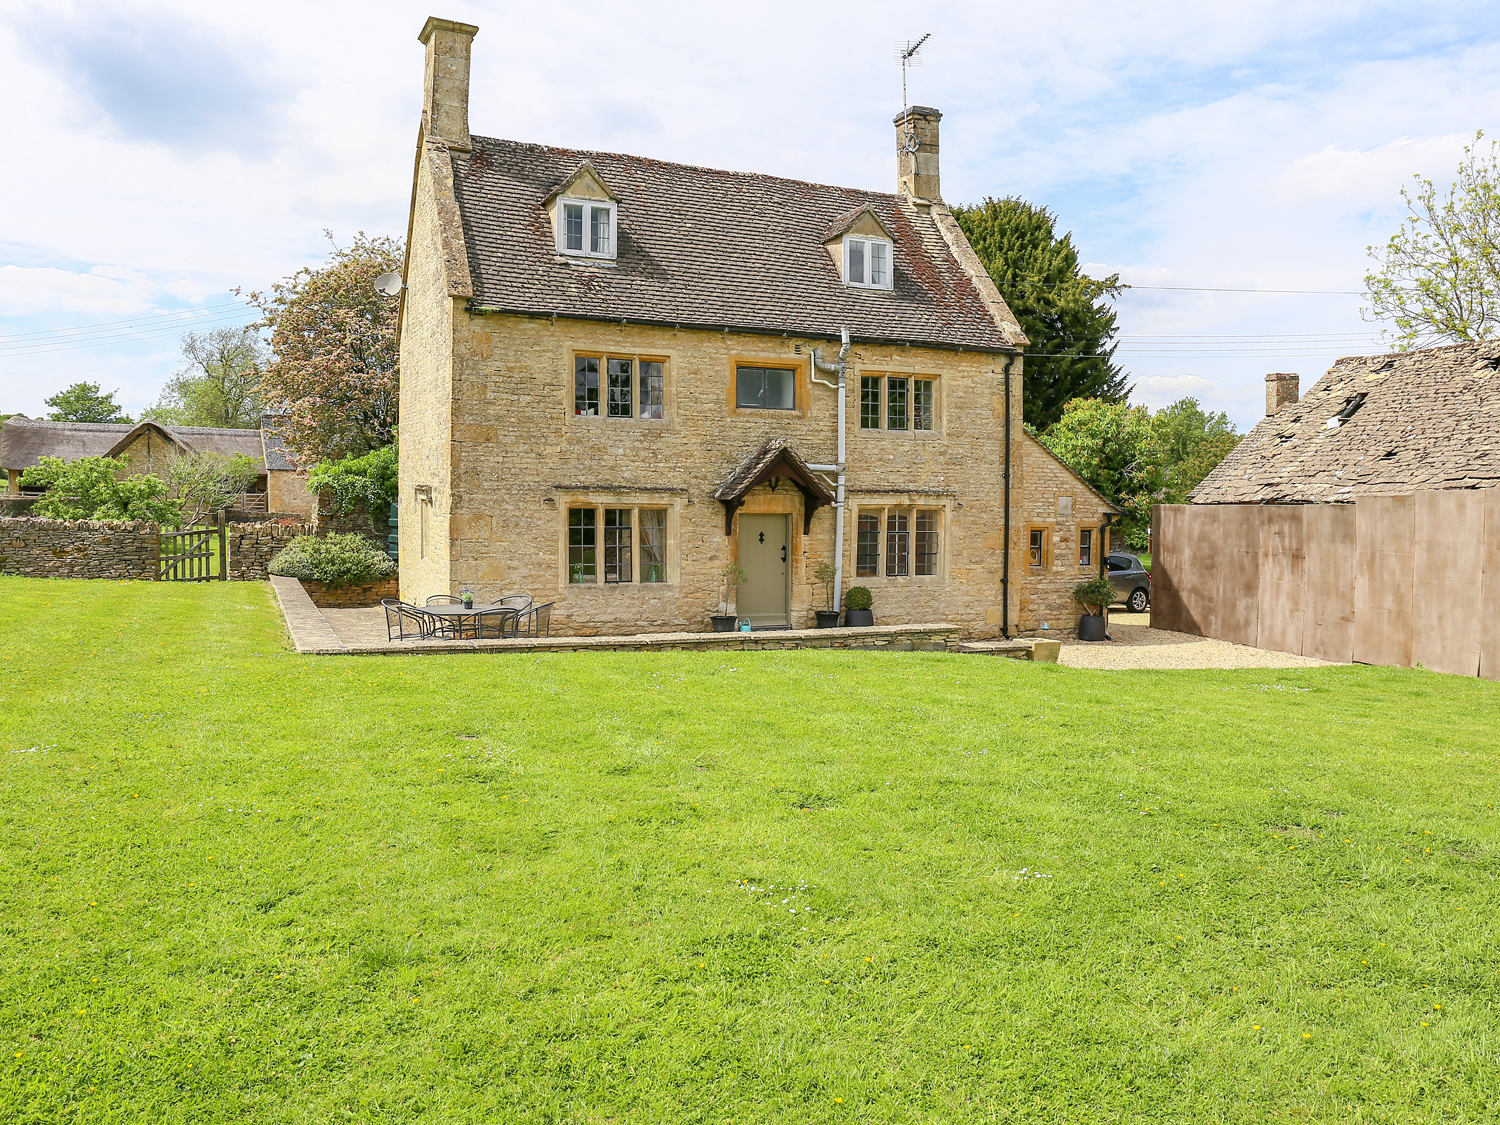 3 bedroom Cottage for rent in Stow on the Wold